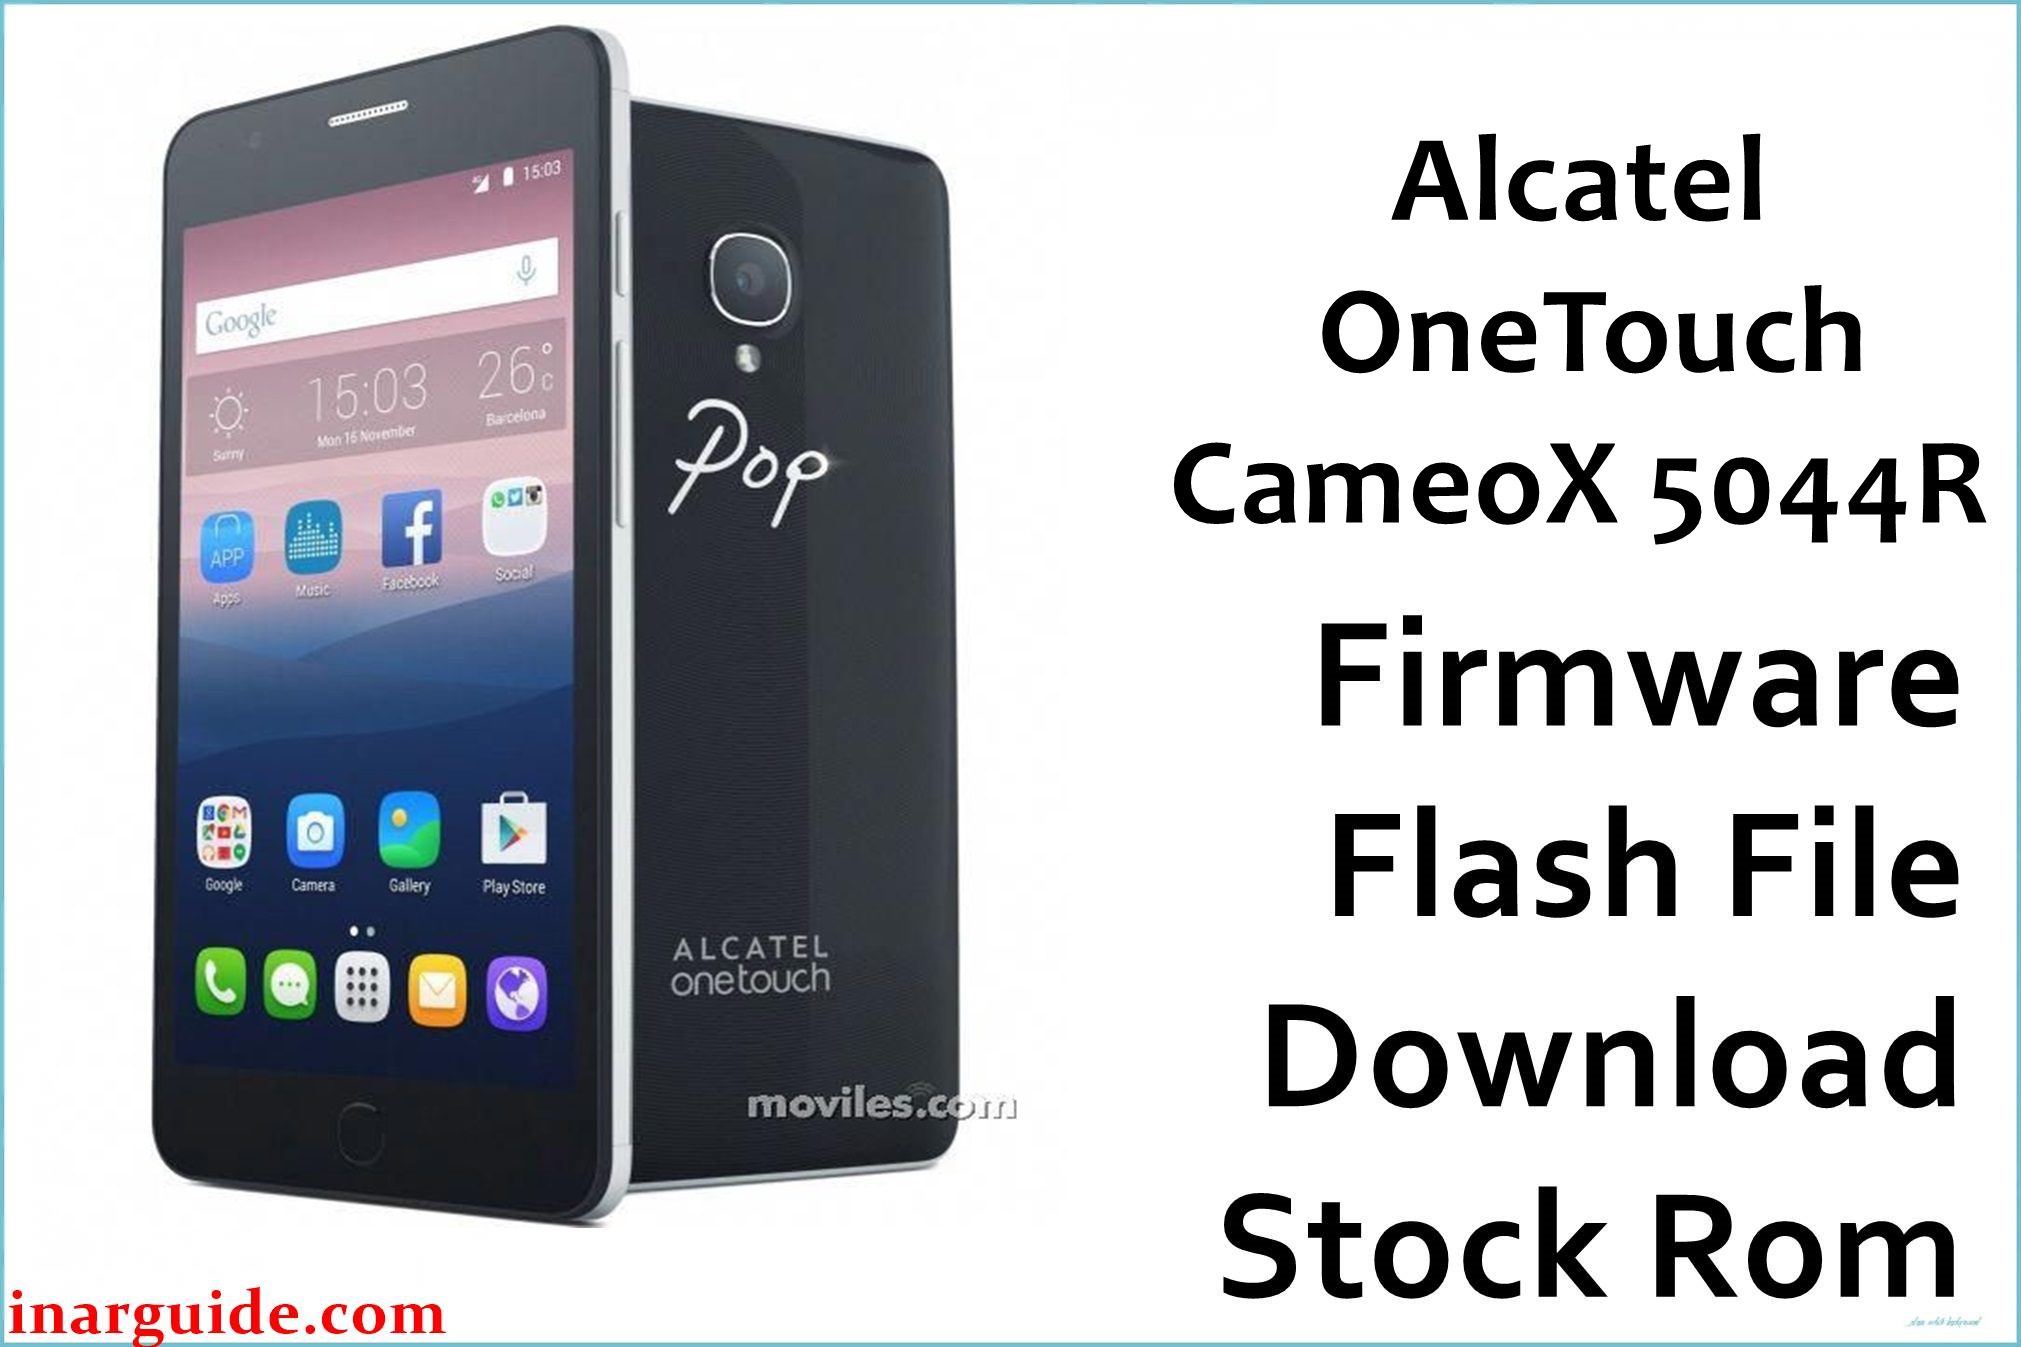 Alcatel OneTouch CameoX 5044R